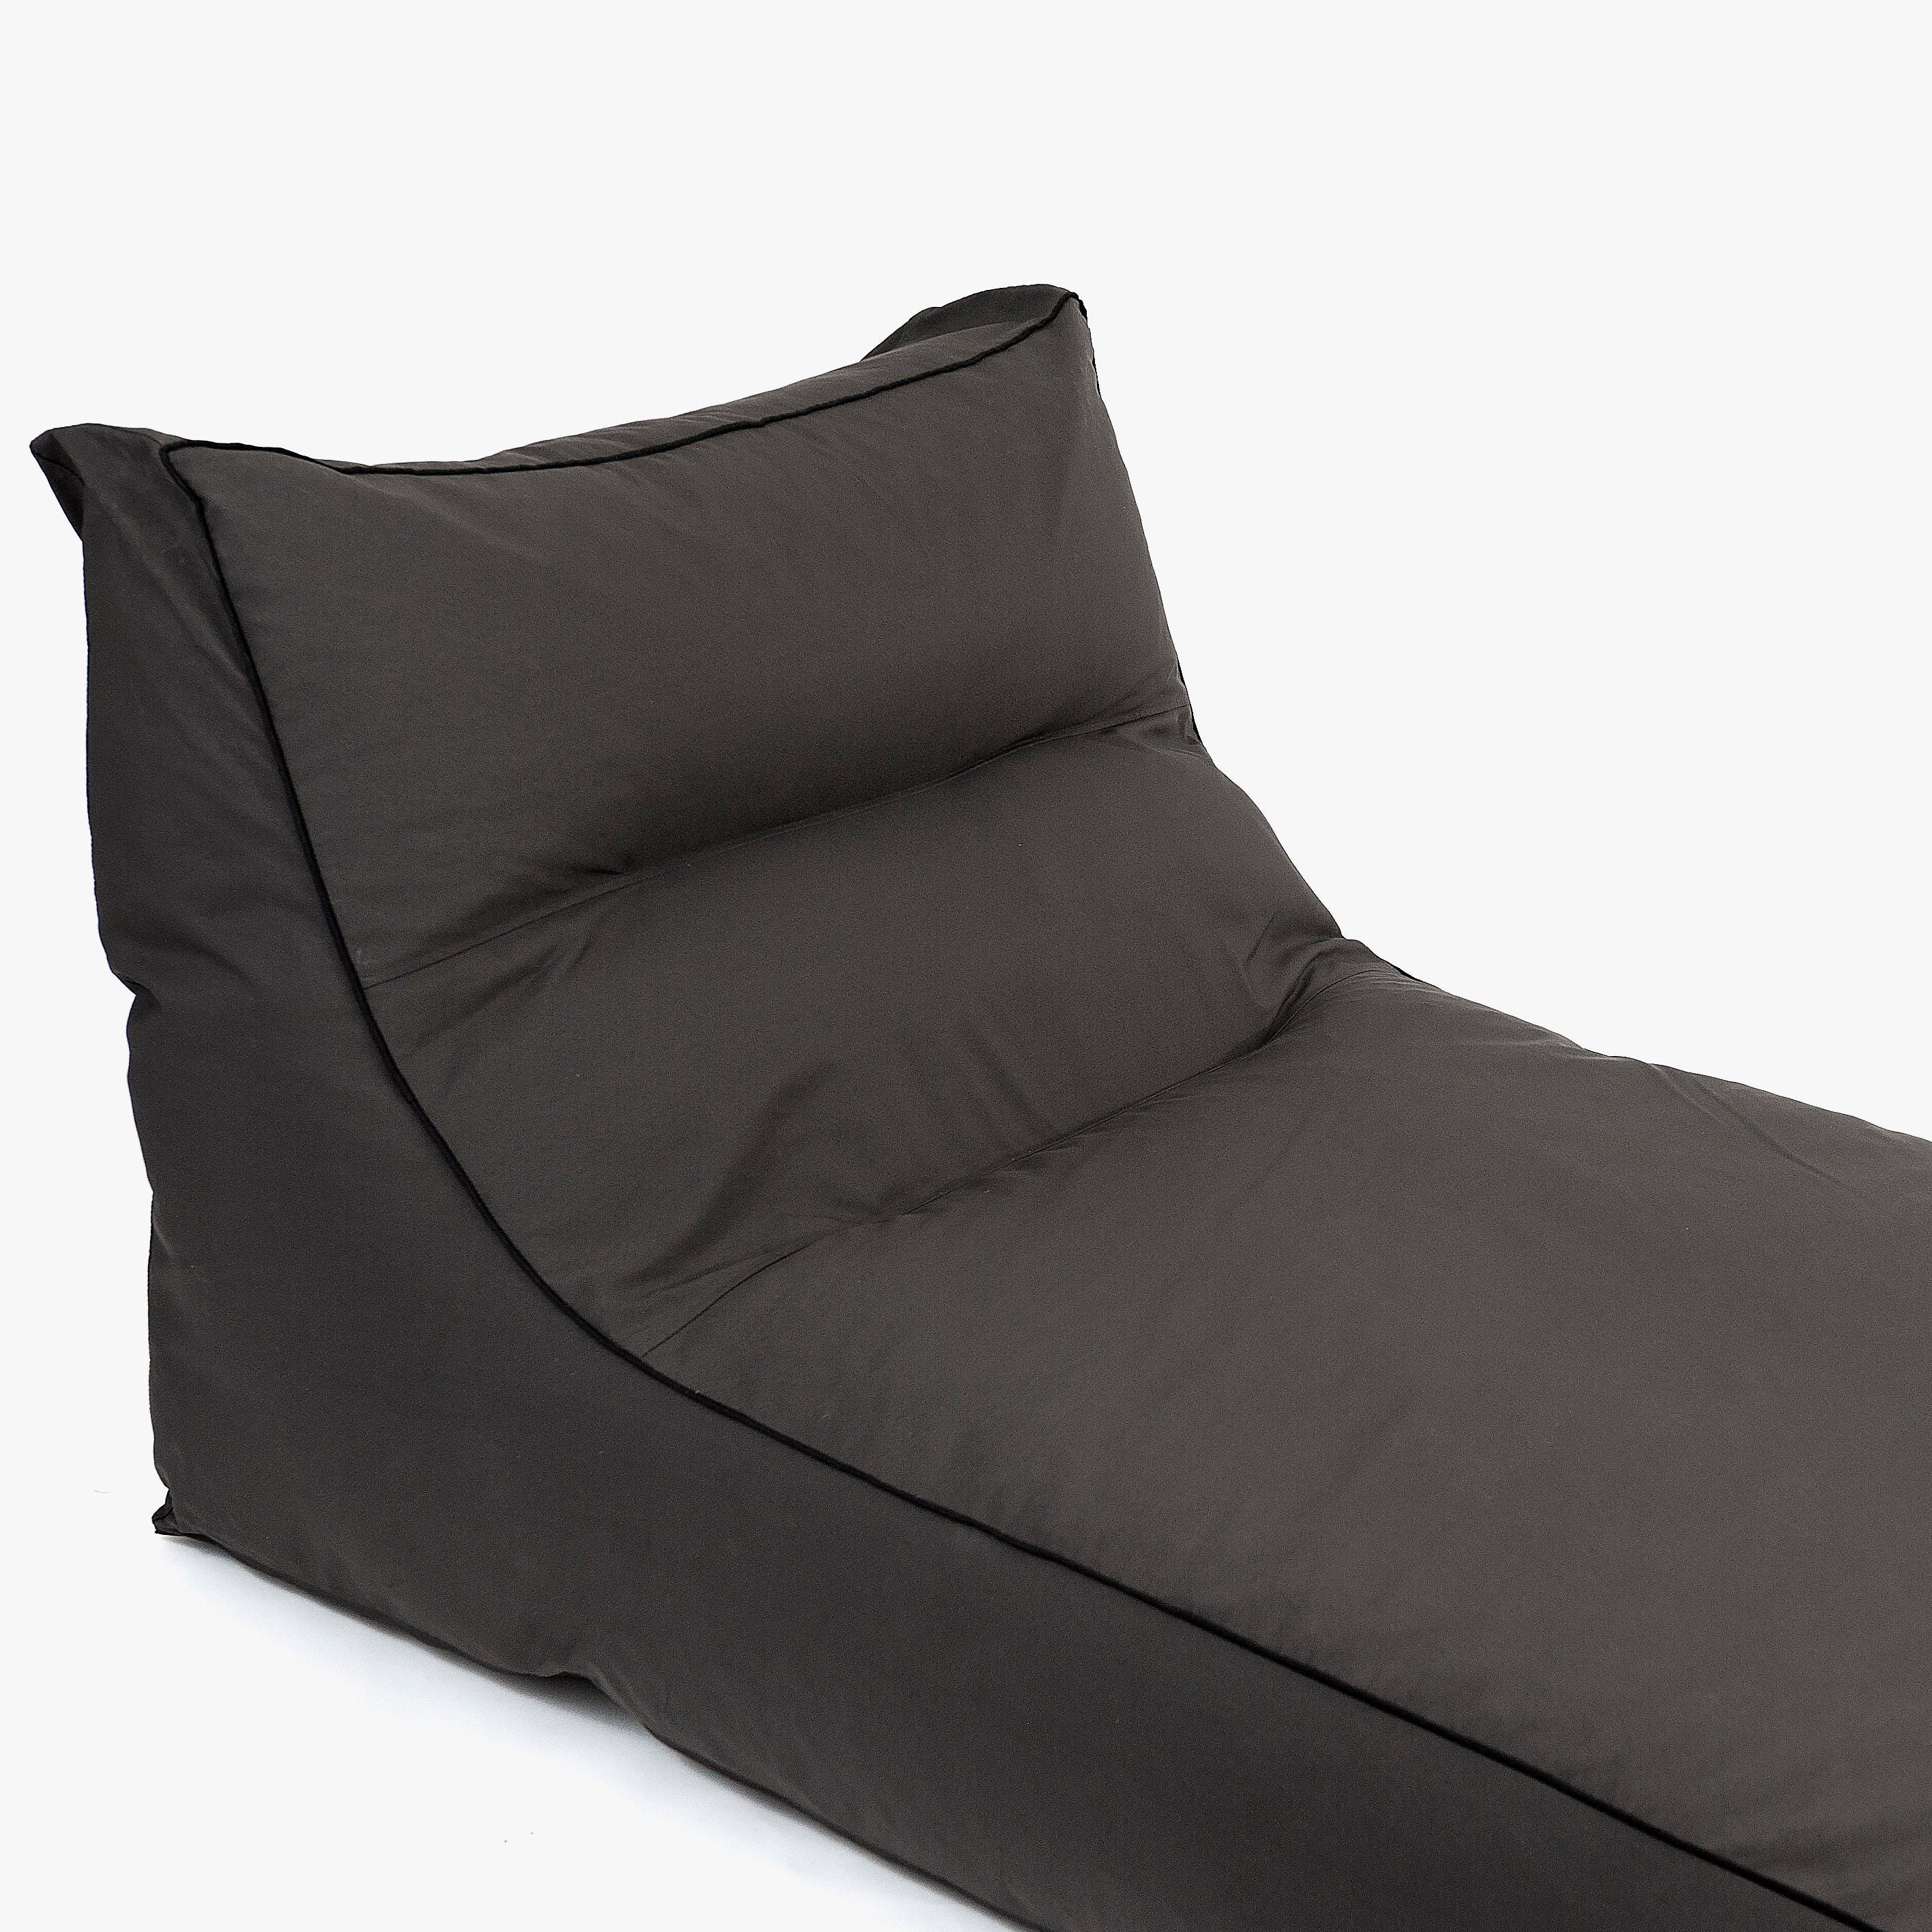 Session Bean Bag Lounger | Charcoal